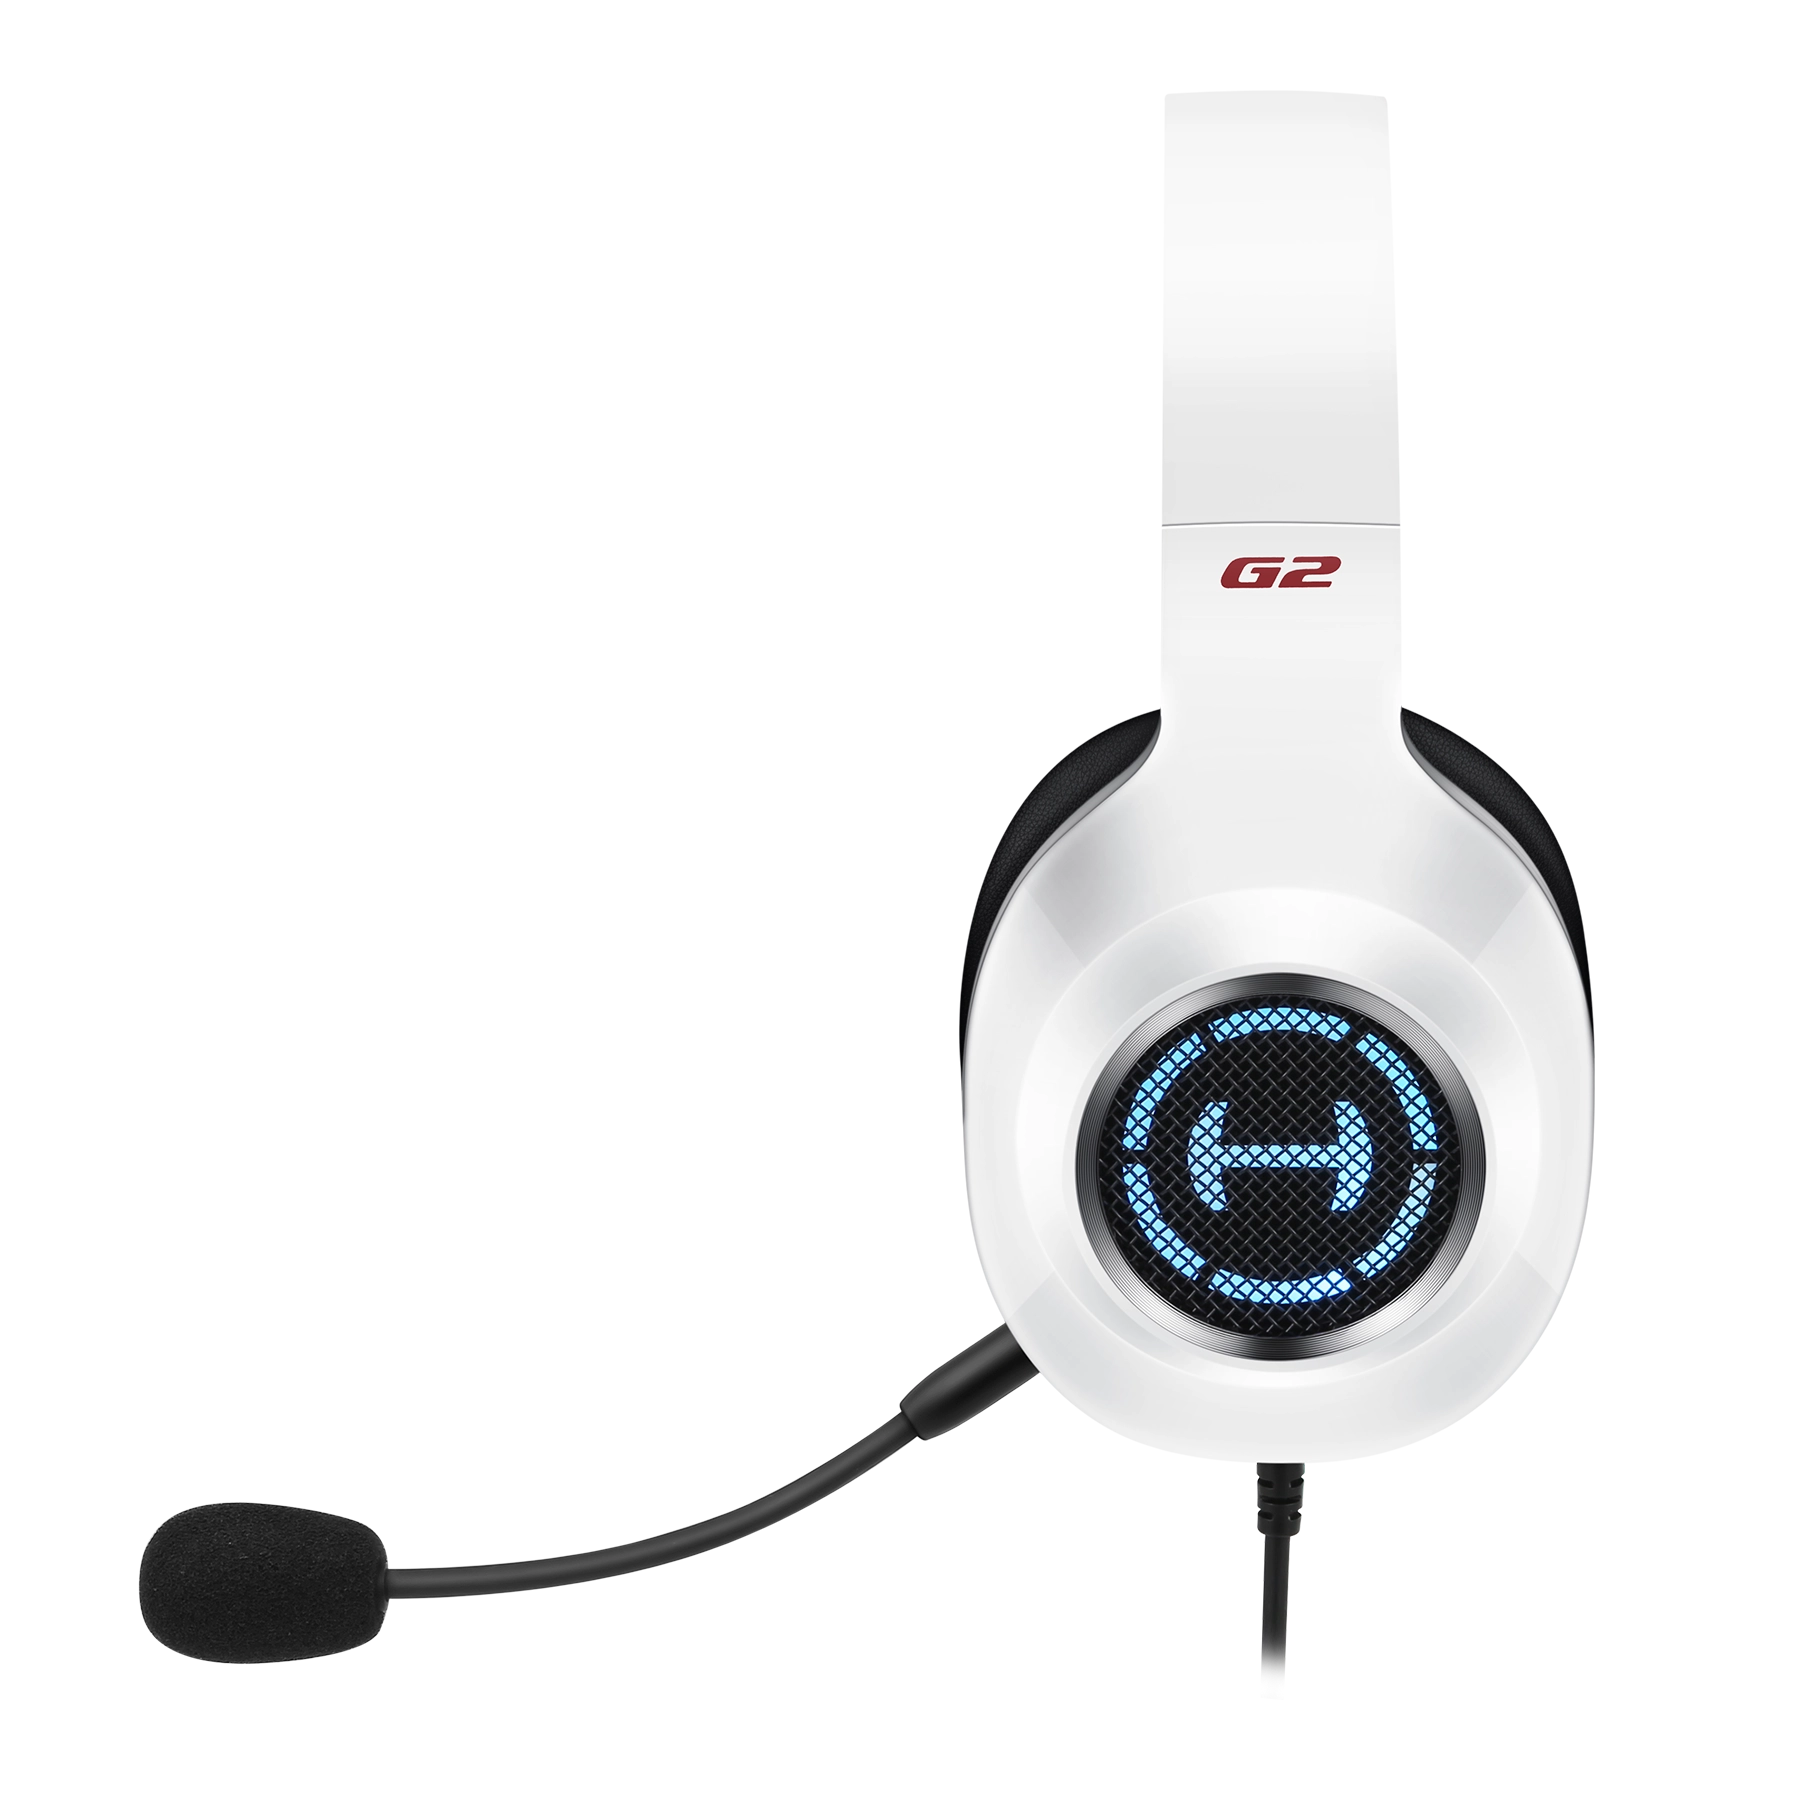 g2Ⅱ_headset product pictures white_